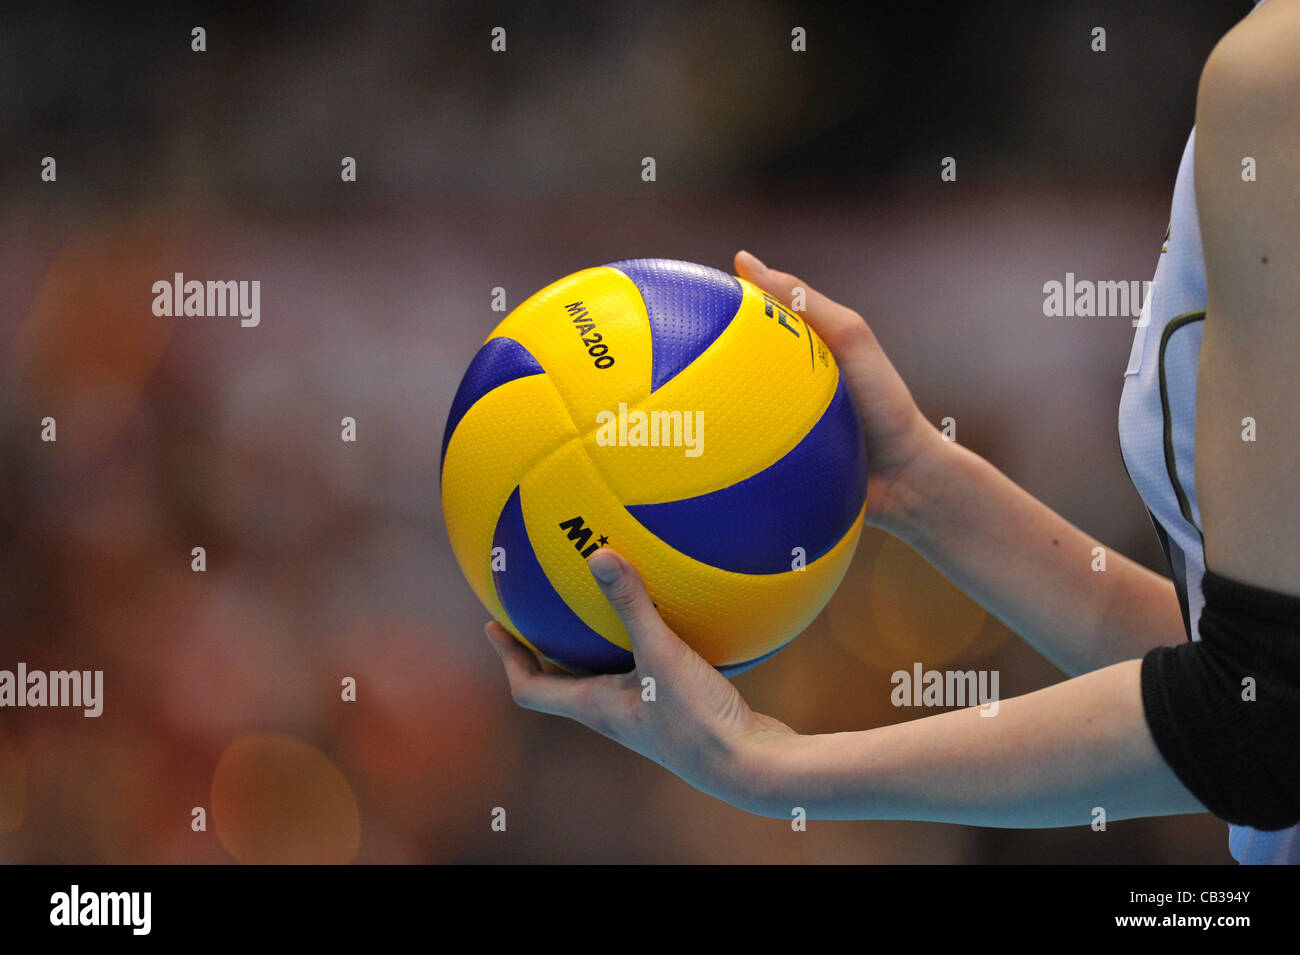 The Detailed Shot May 27 2012 Volleyball Fivb The Women S World Olympic Qualification